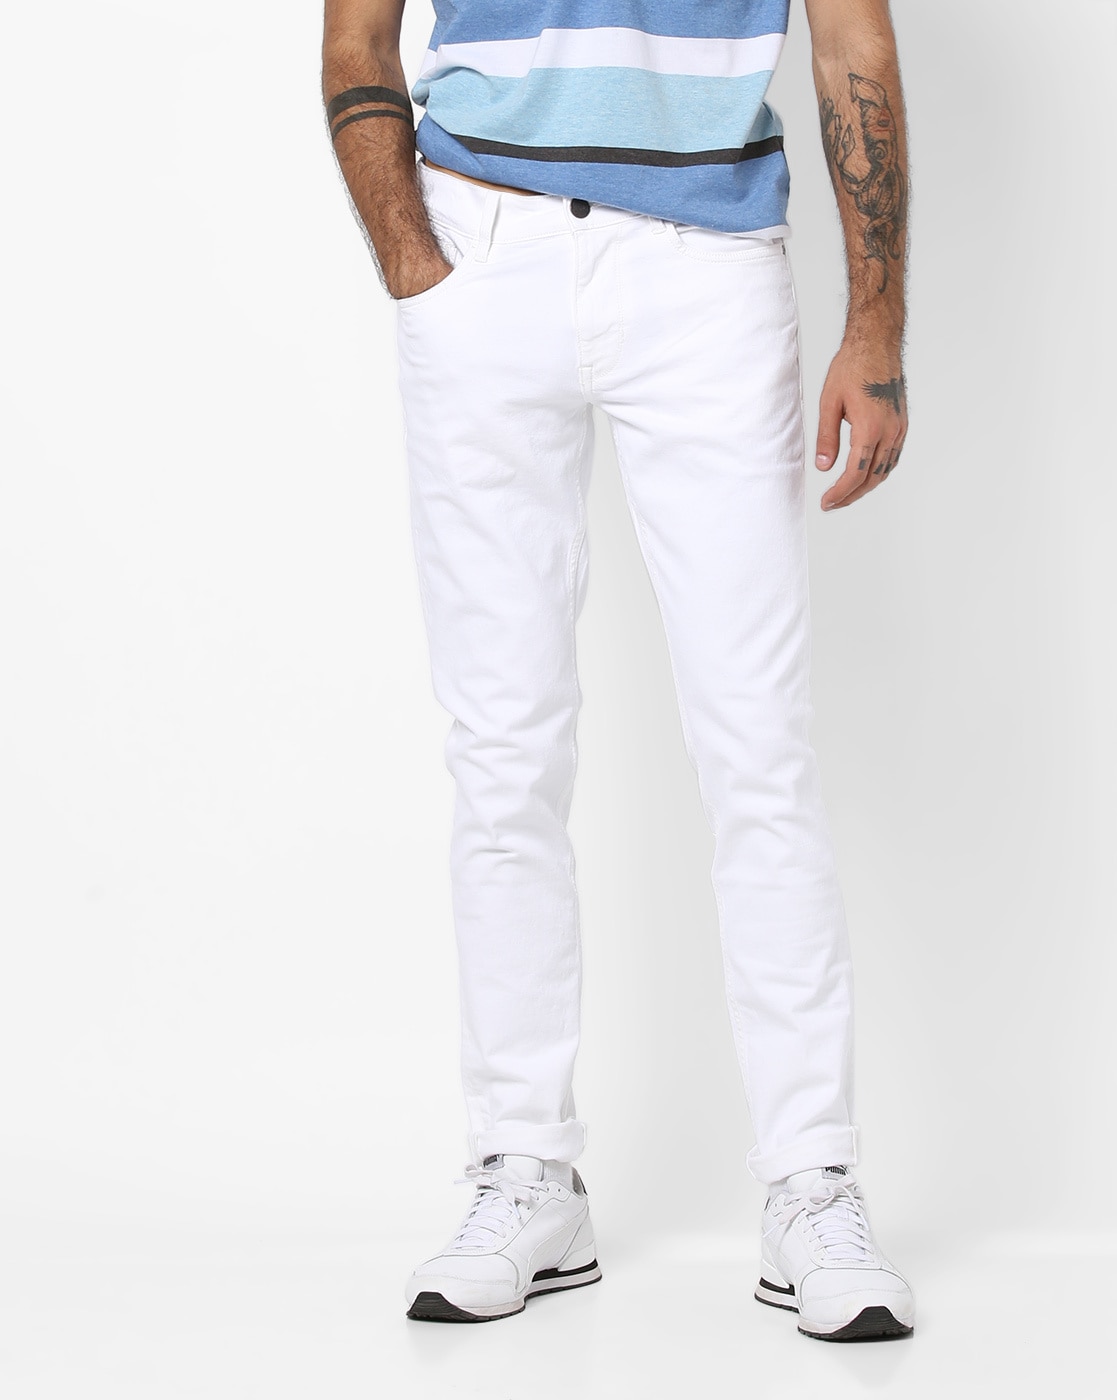 White Jeans for Men by U.S. Polo Assn 